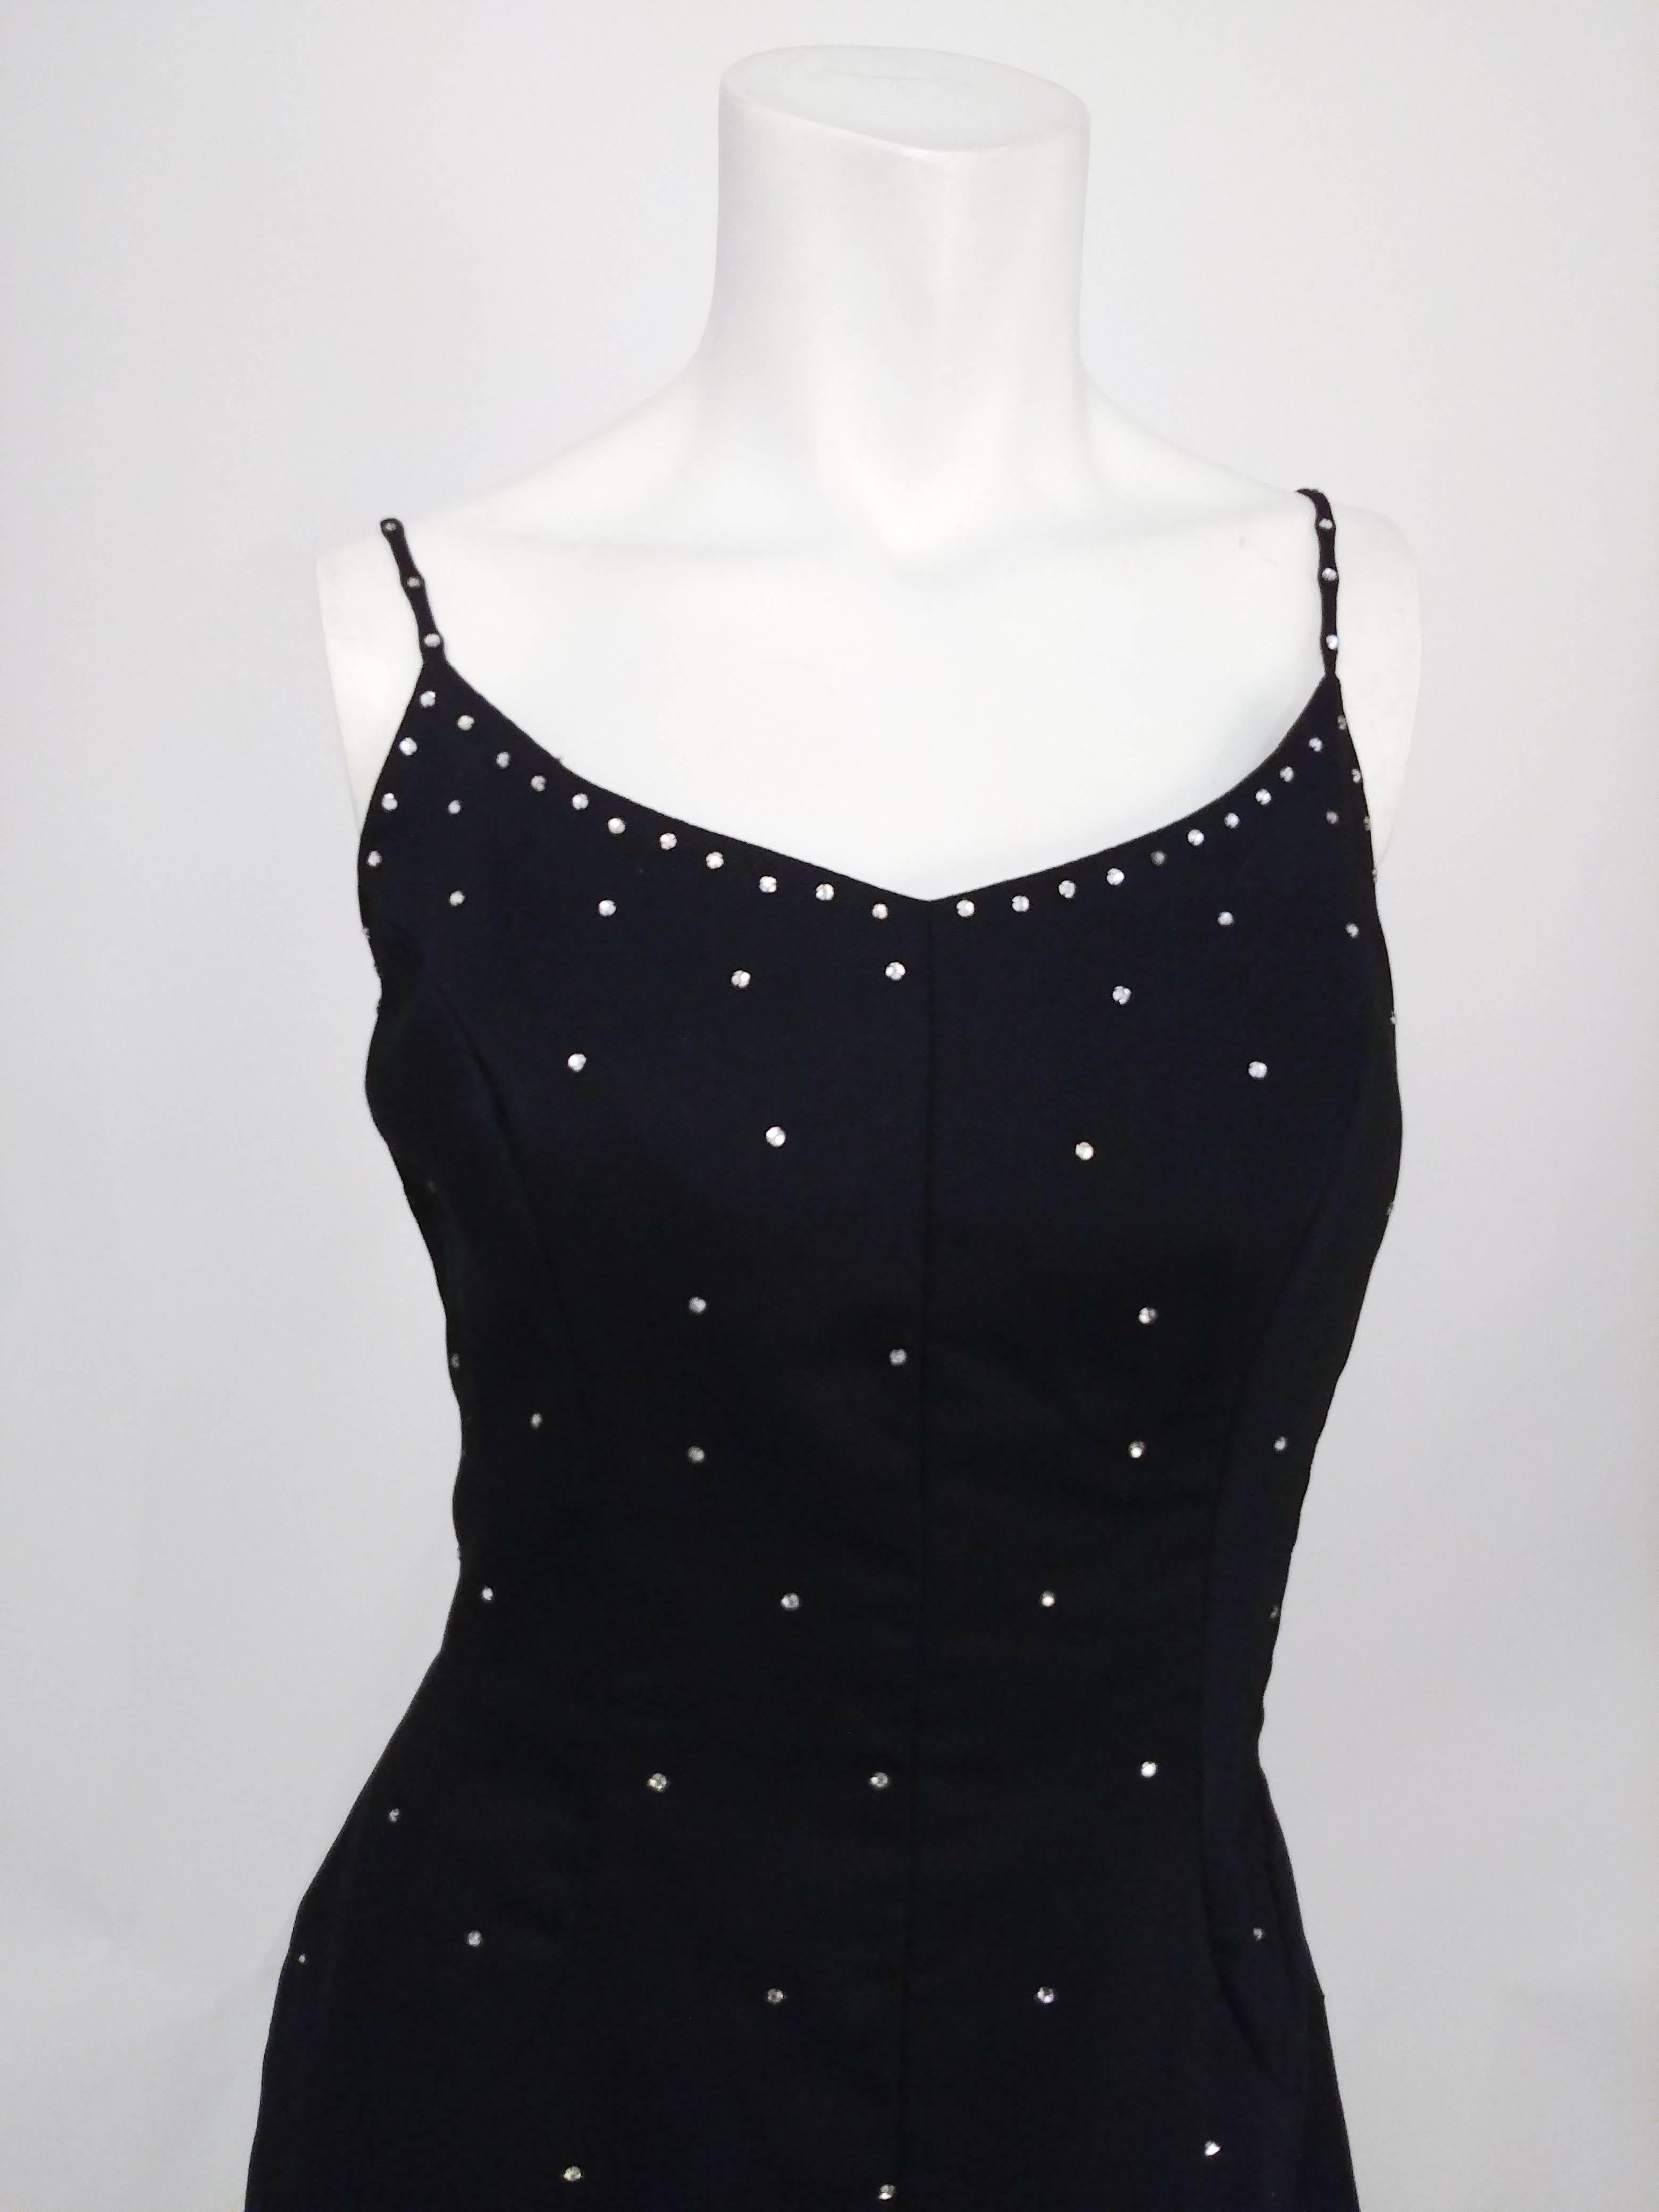 1960s Black Rhinestoned Cocktail Dress. Rhinestone detail at straps and graduating down to bottom. Pique fabric with some shine. Curved front slit. 